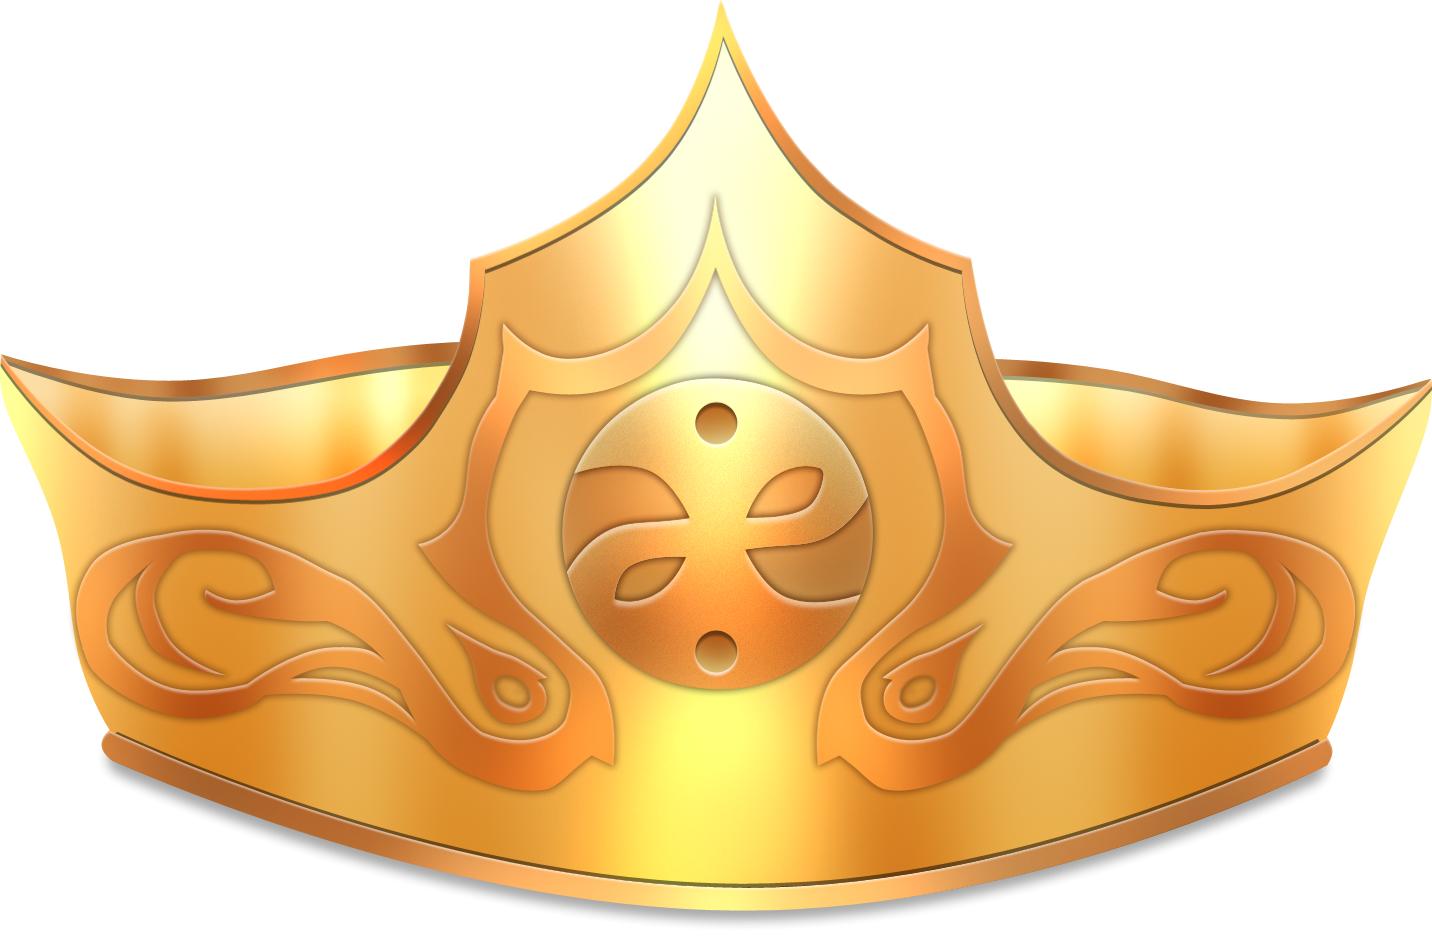 crown clipart gold